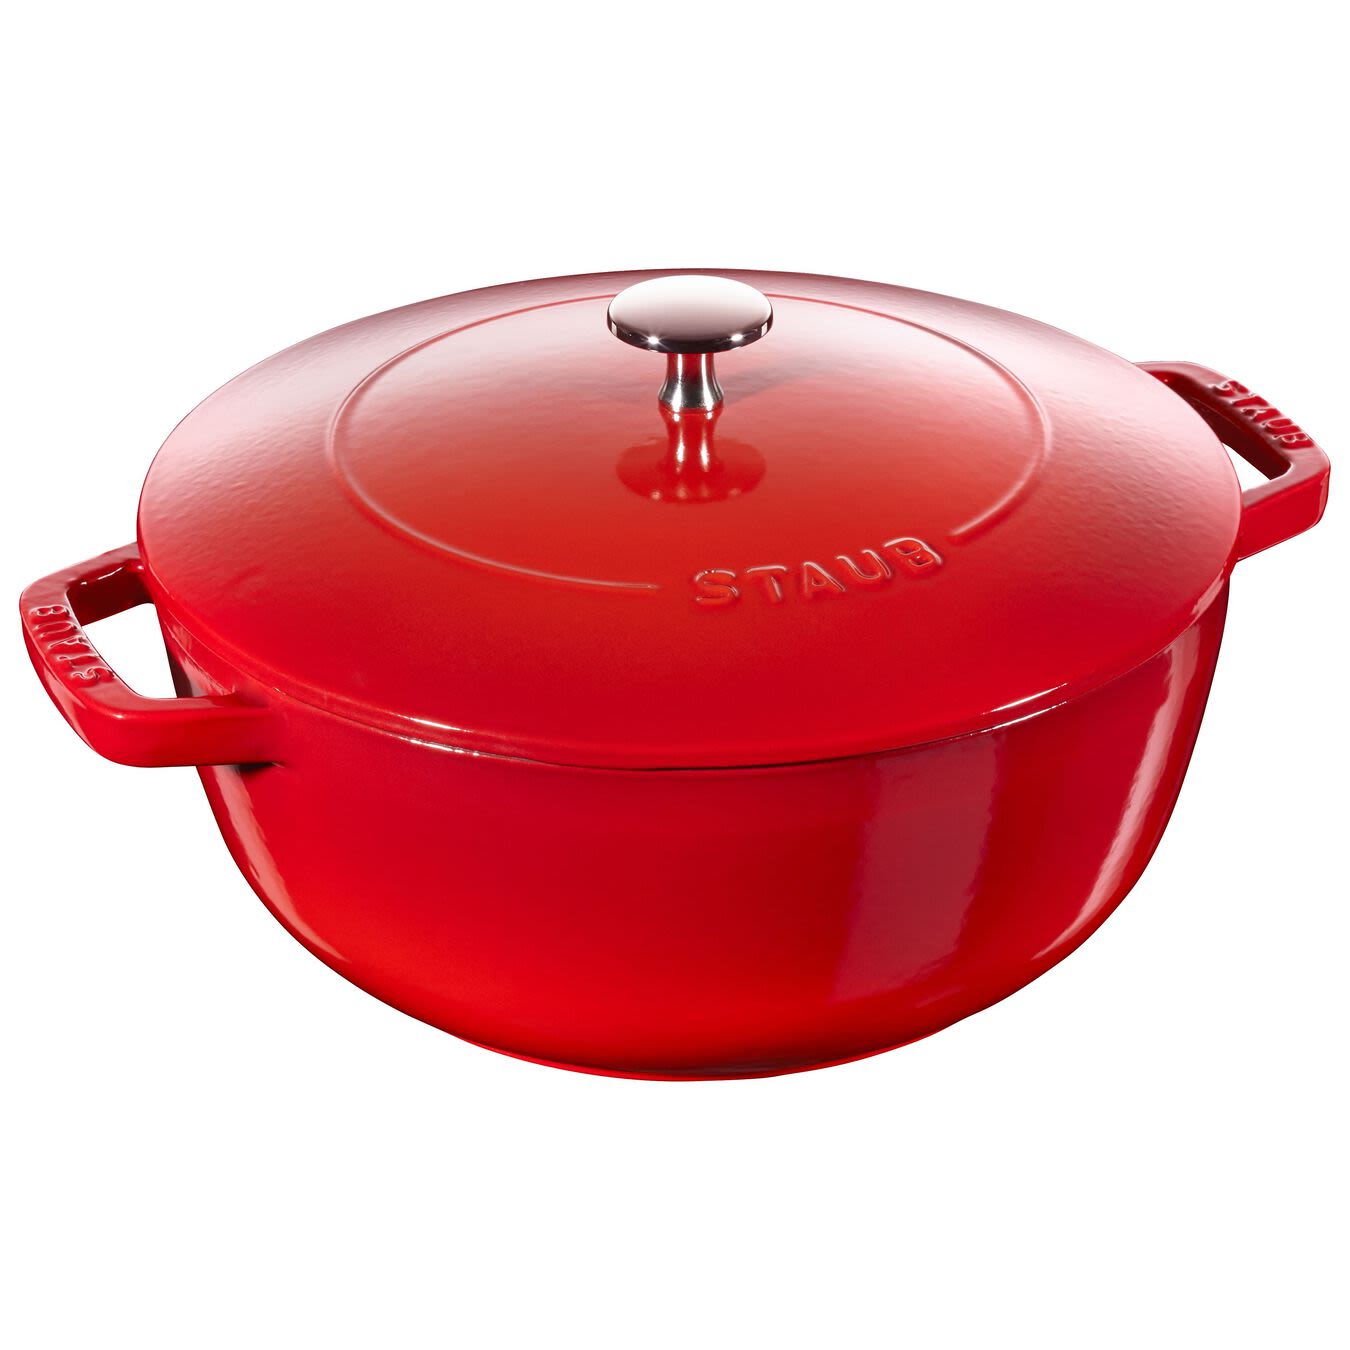 https://cdn.apartmenttherapy.info/image/upload/t_1:1/v1611072505/gen-workflow/product-database/staub-cast-iron-french-oven.jpg